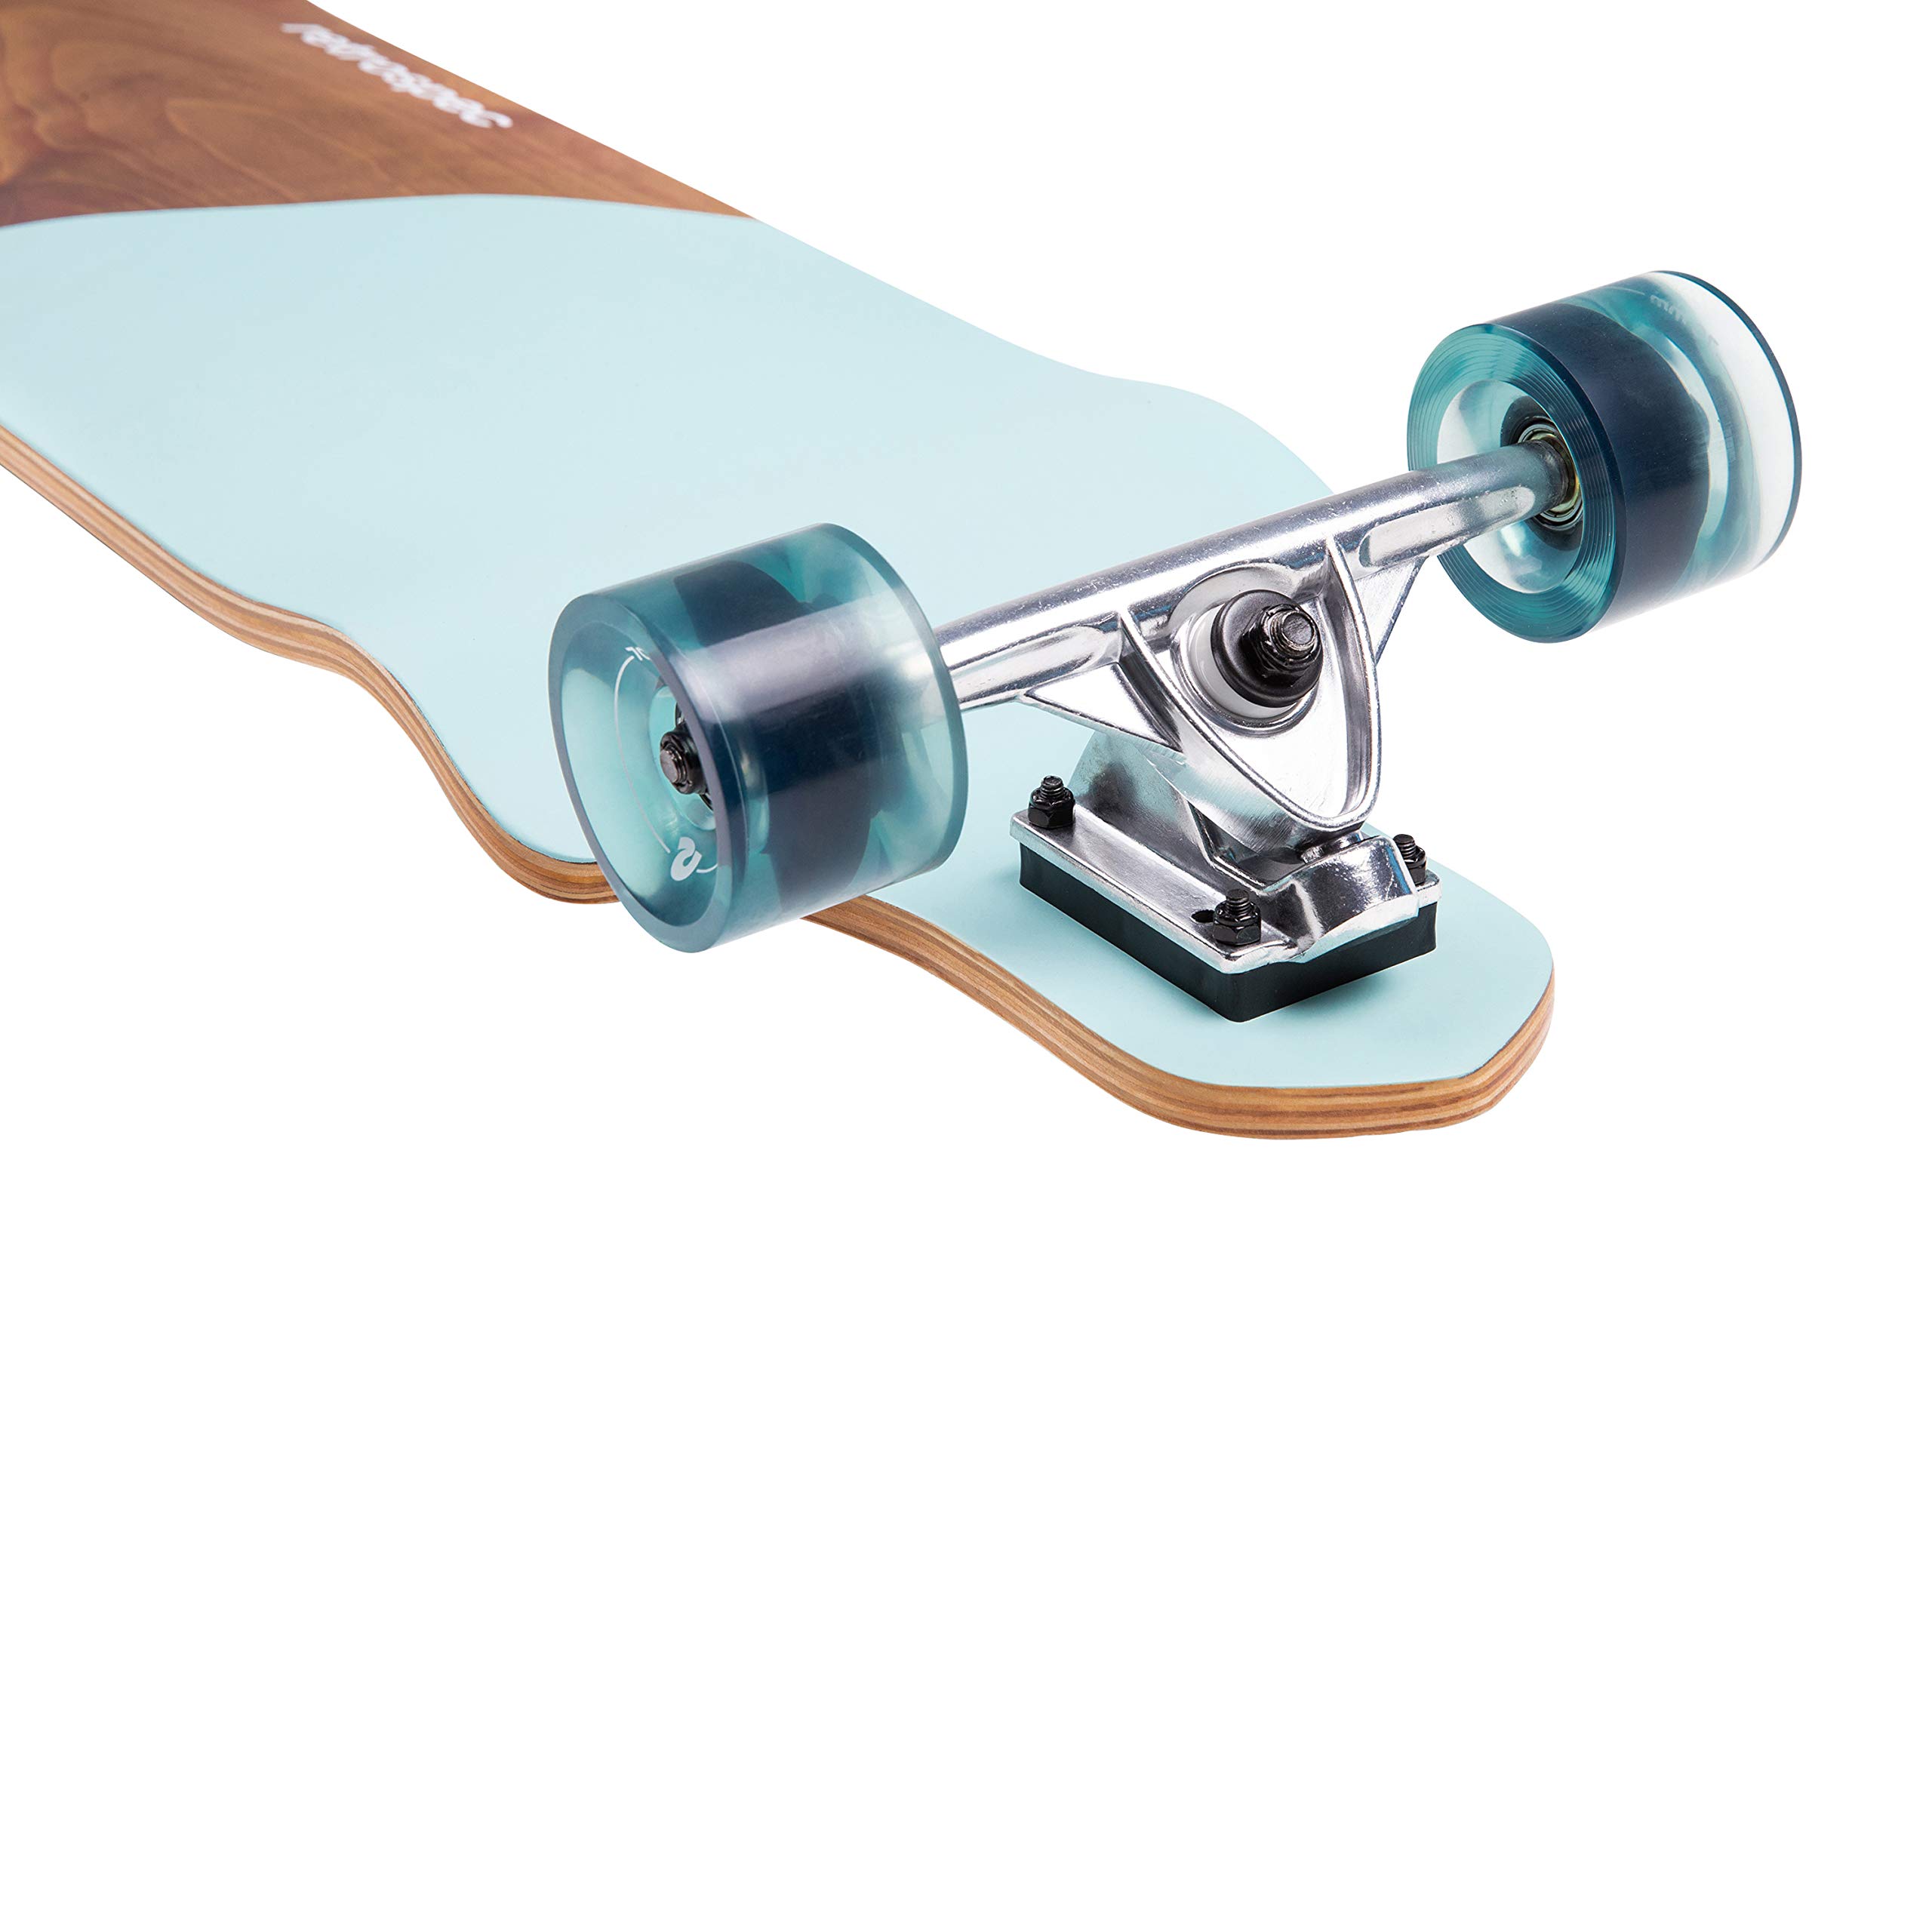 Retrospec Tidal 41-inch Drop-Down Longboard Skateboard Complete 9-Ply Canadian Maple Wood Build Cruiser for Commuting, Cruising, Carving & Downhill Riding